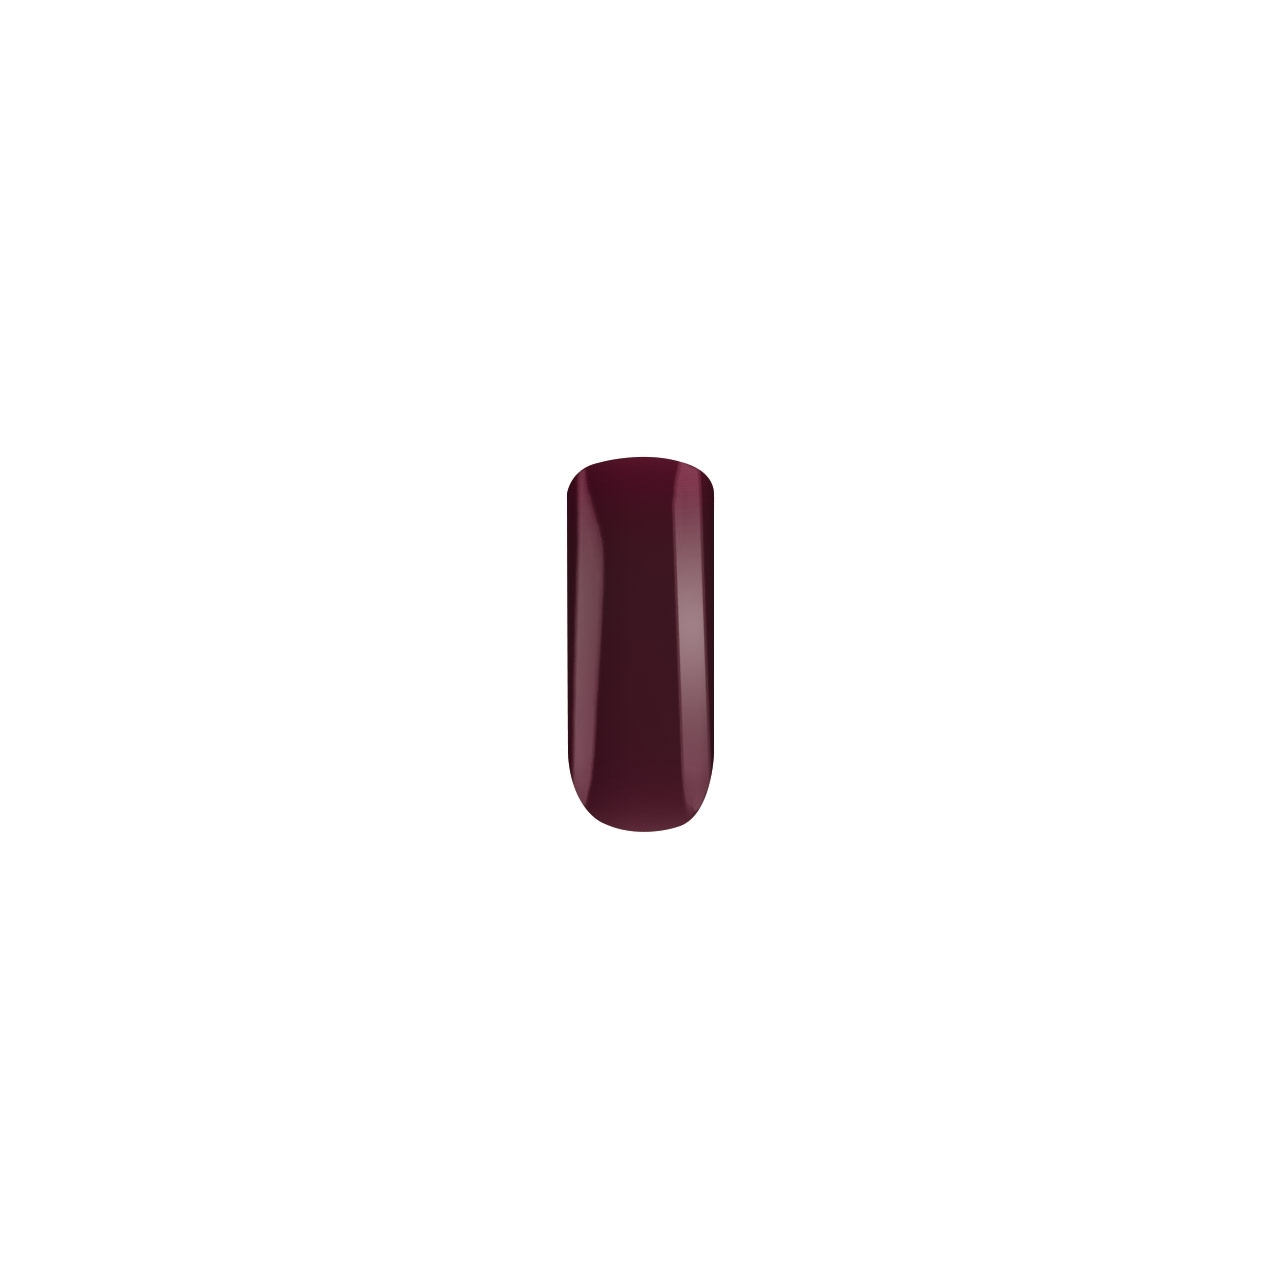 BAEHR BEAUTY CONCEPT - NAILS Nagellack cool cassis 11 ml